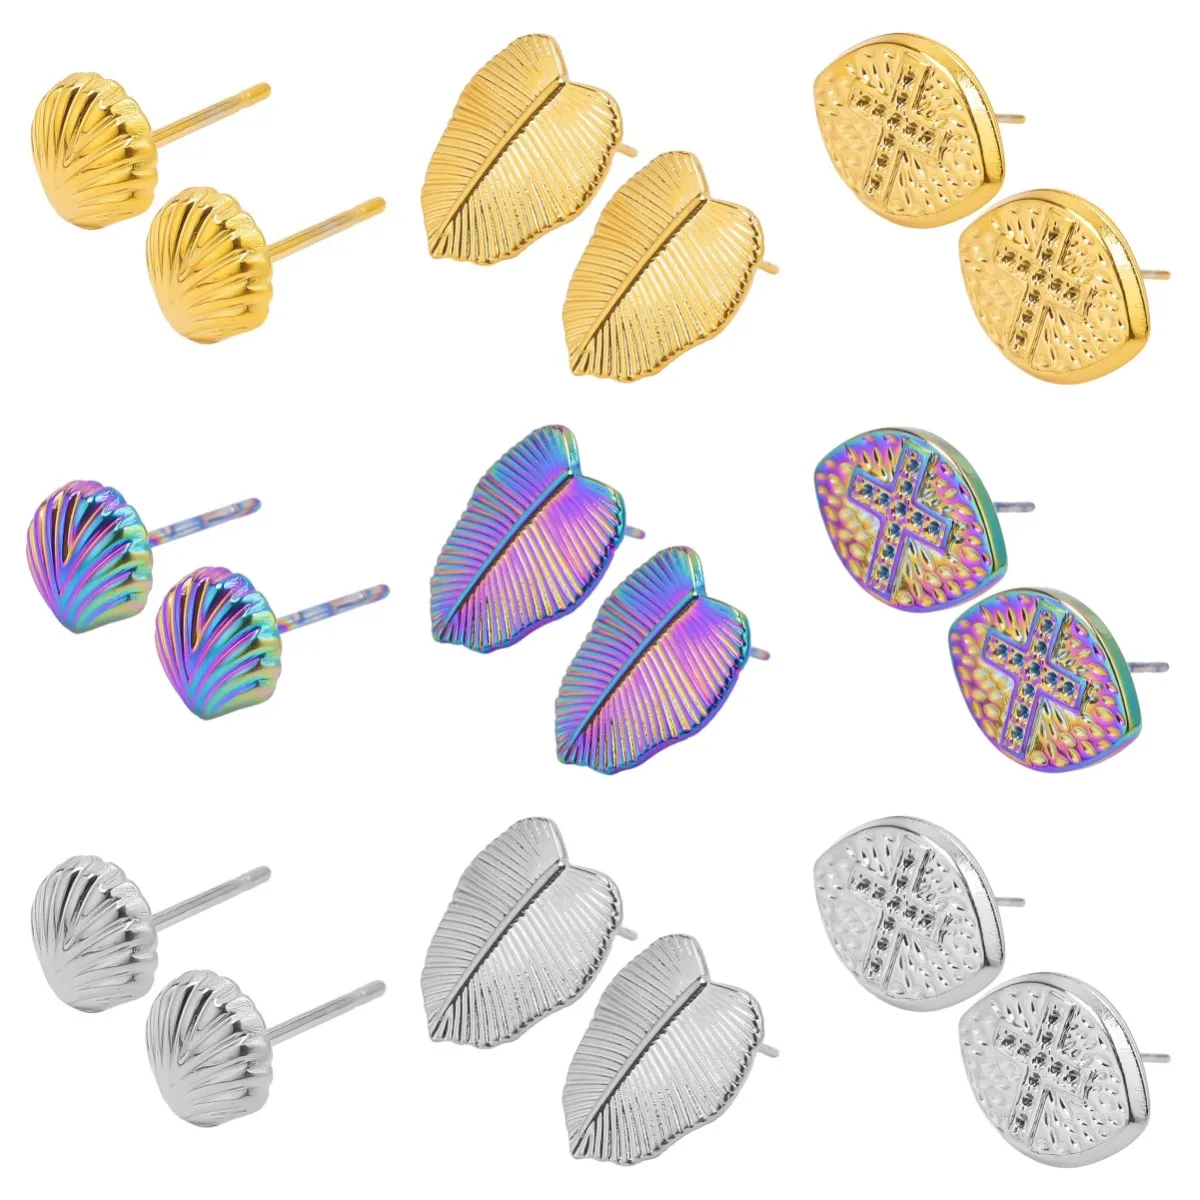 

6Pairs Multiple Style Stainless Steel Earrings for Women Geometry Leaves/Crosses/Shells Hollow Earring Jewelry Fashion DIY Gift